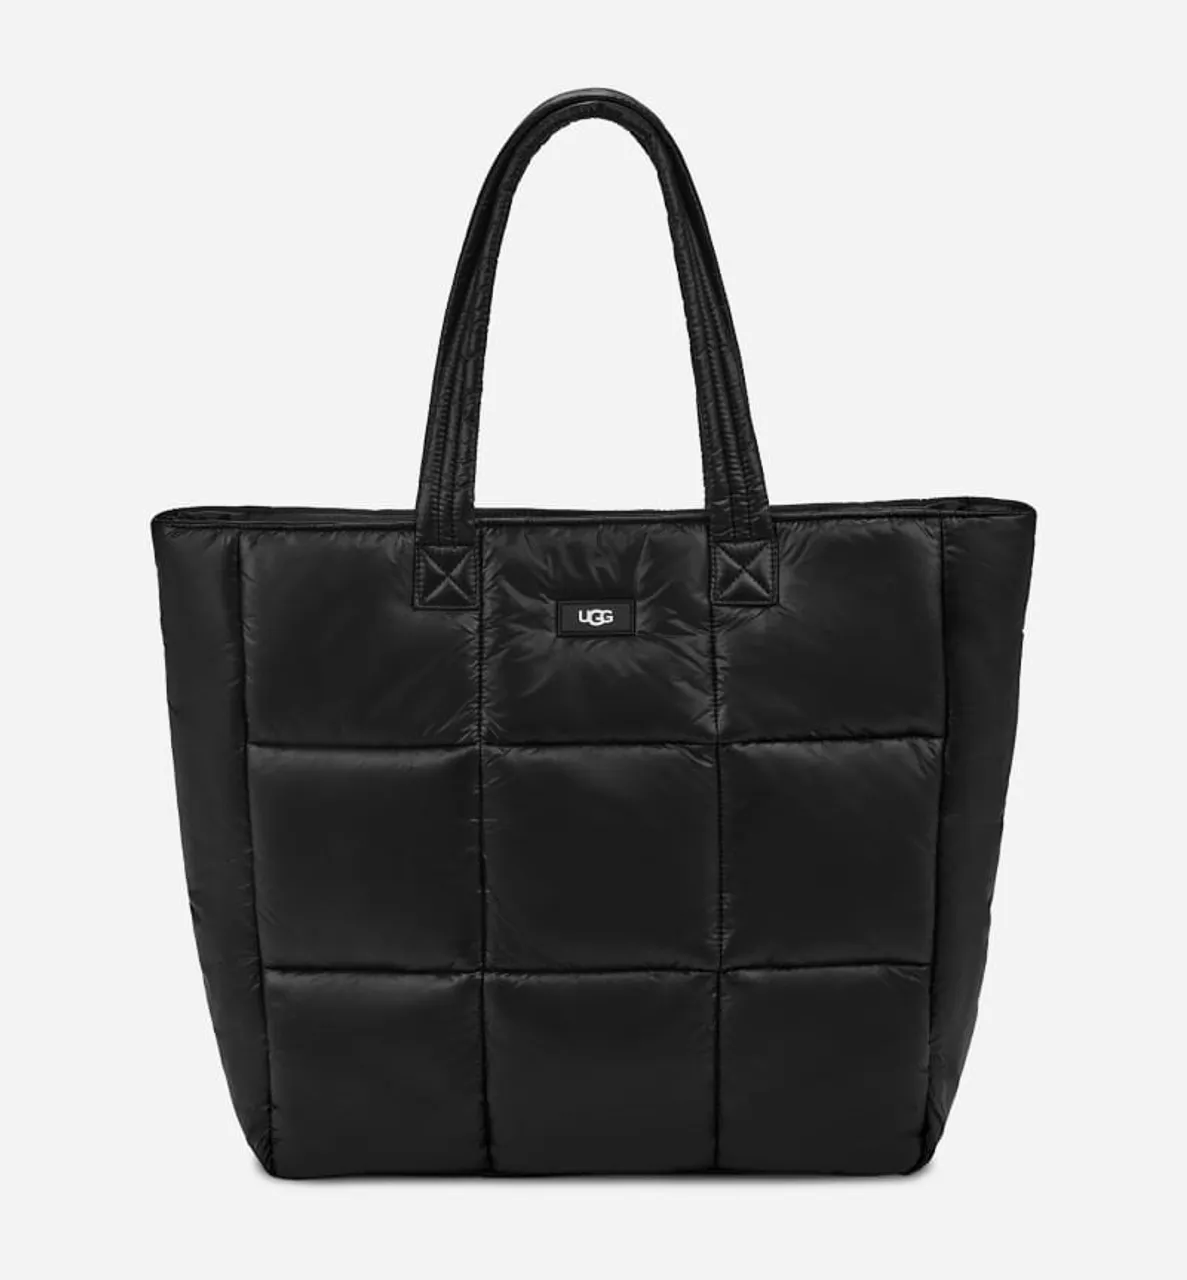 UGG® Ellory Puff Tote Bag for Women in Black, Size OS